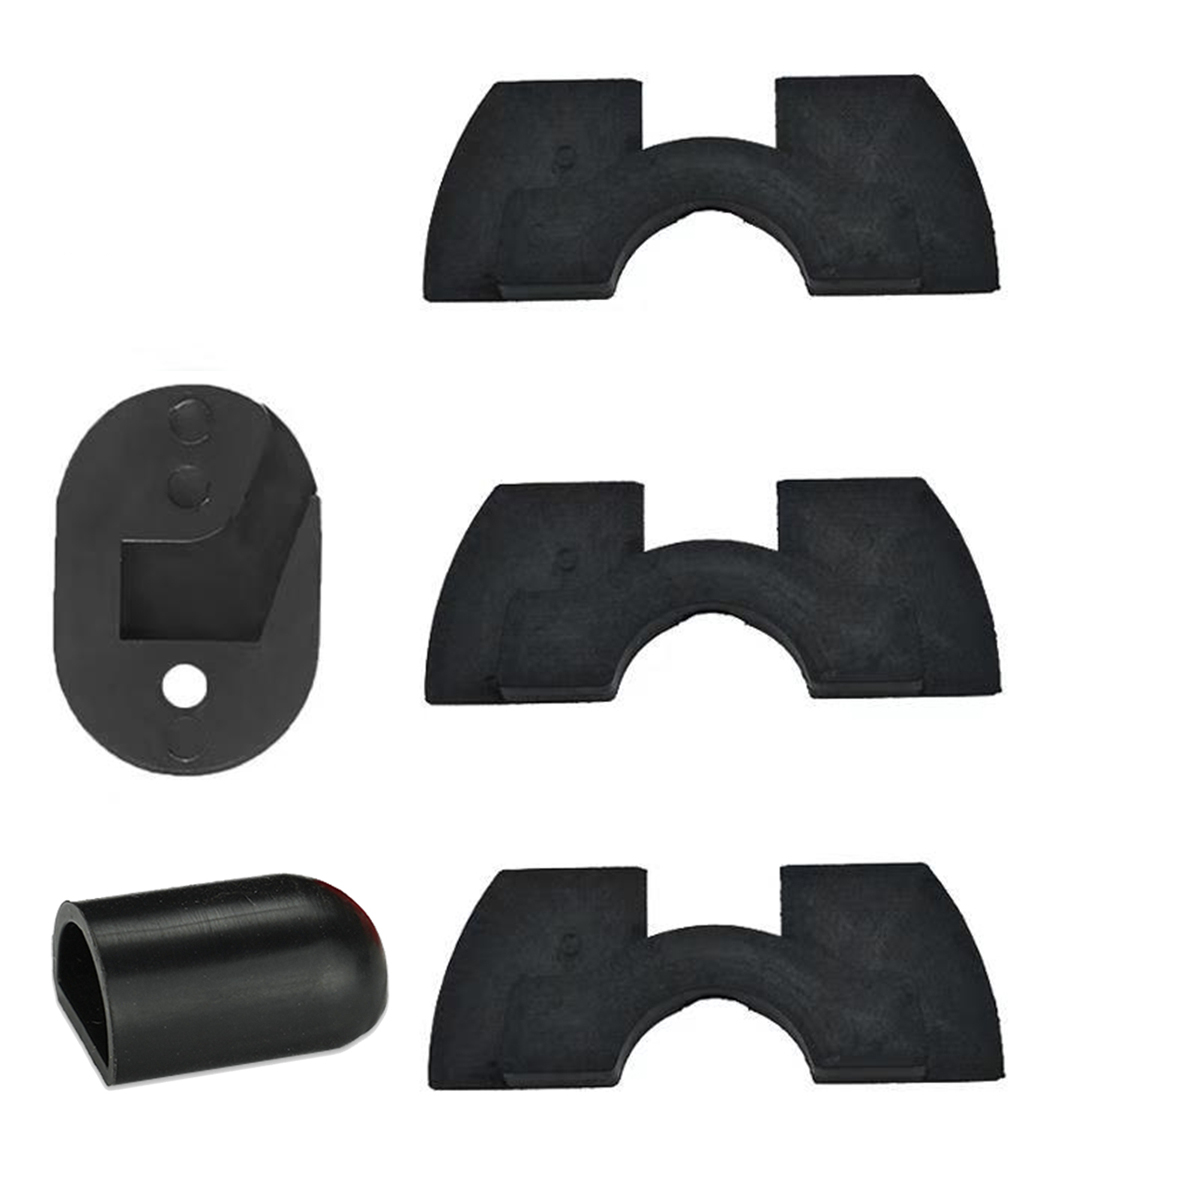 

Tail Light Wire Protector + Anti Vibration Shims + kick Stand Cap for Xiaomi Mijia M365/M187/Pro Scooter Modified Parts Accessories